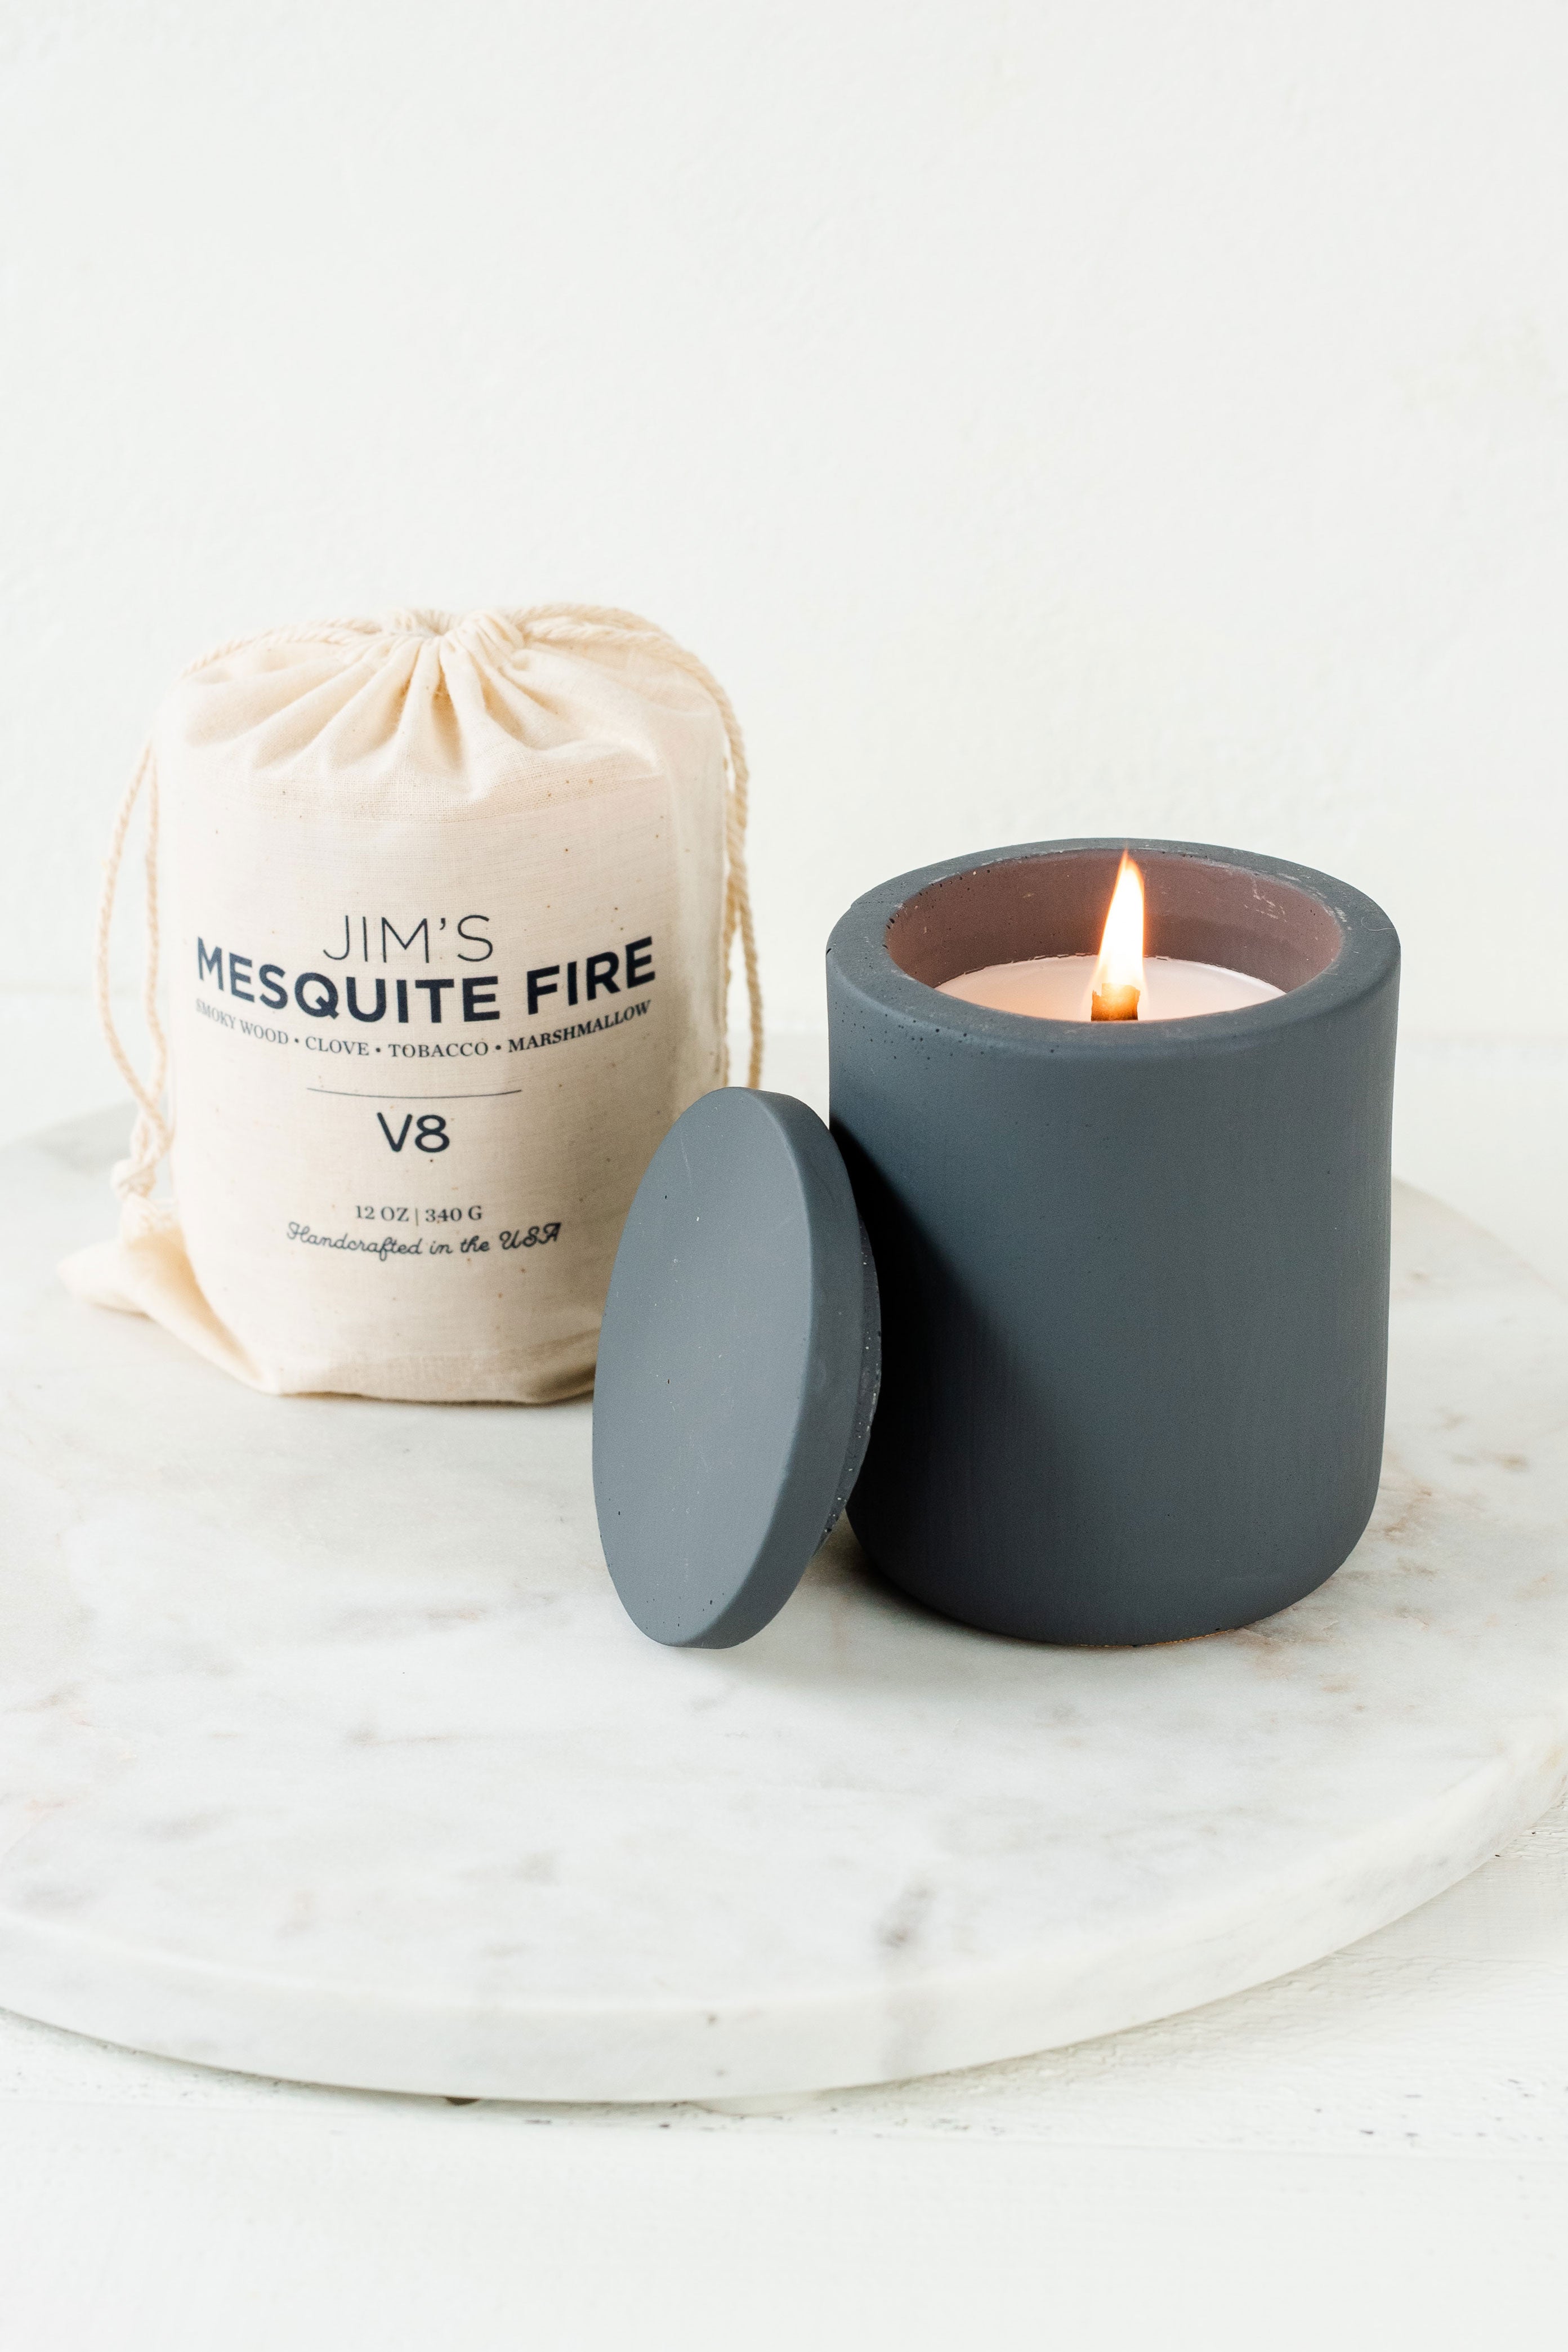 Jim's Mesquite Fire Candle